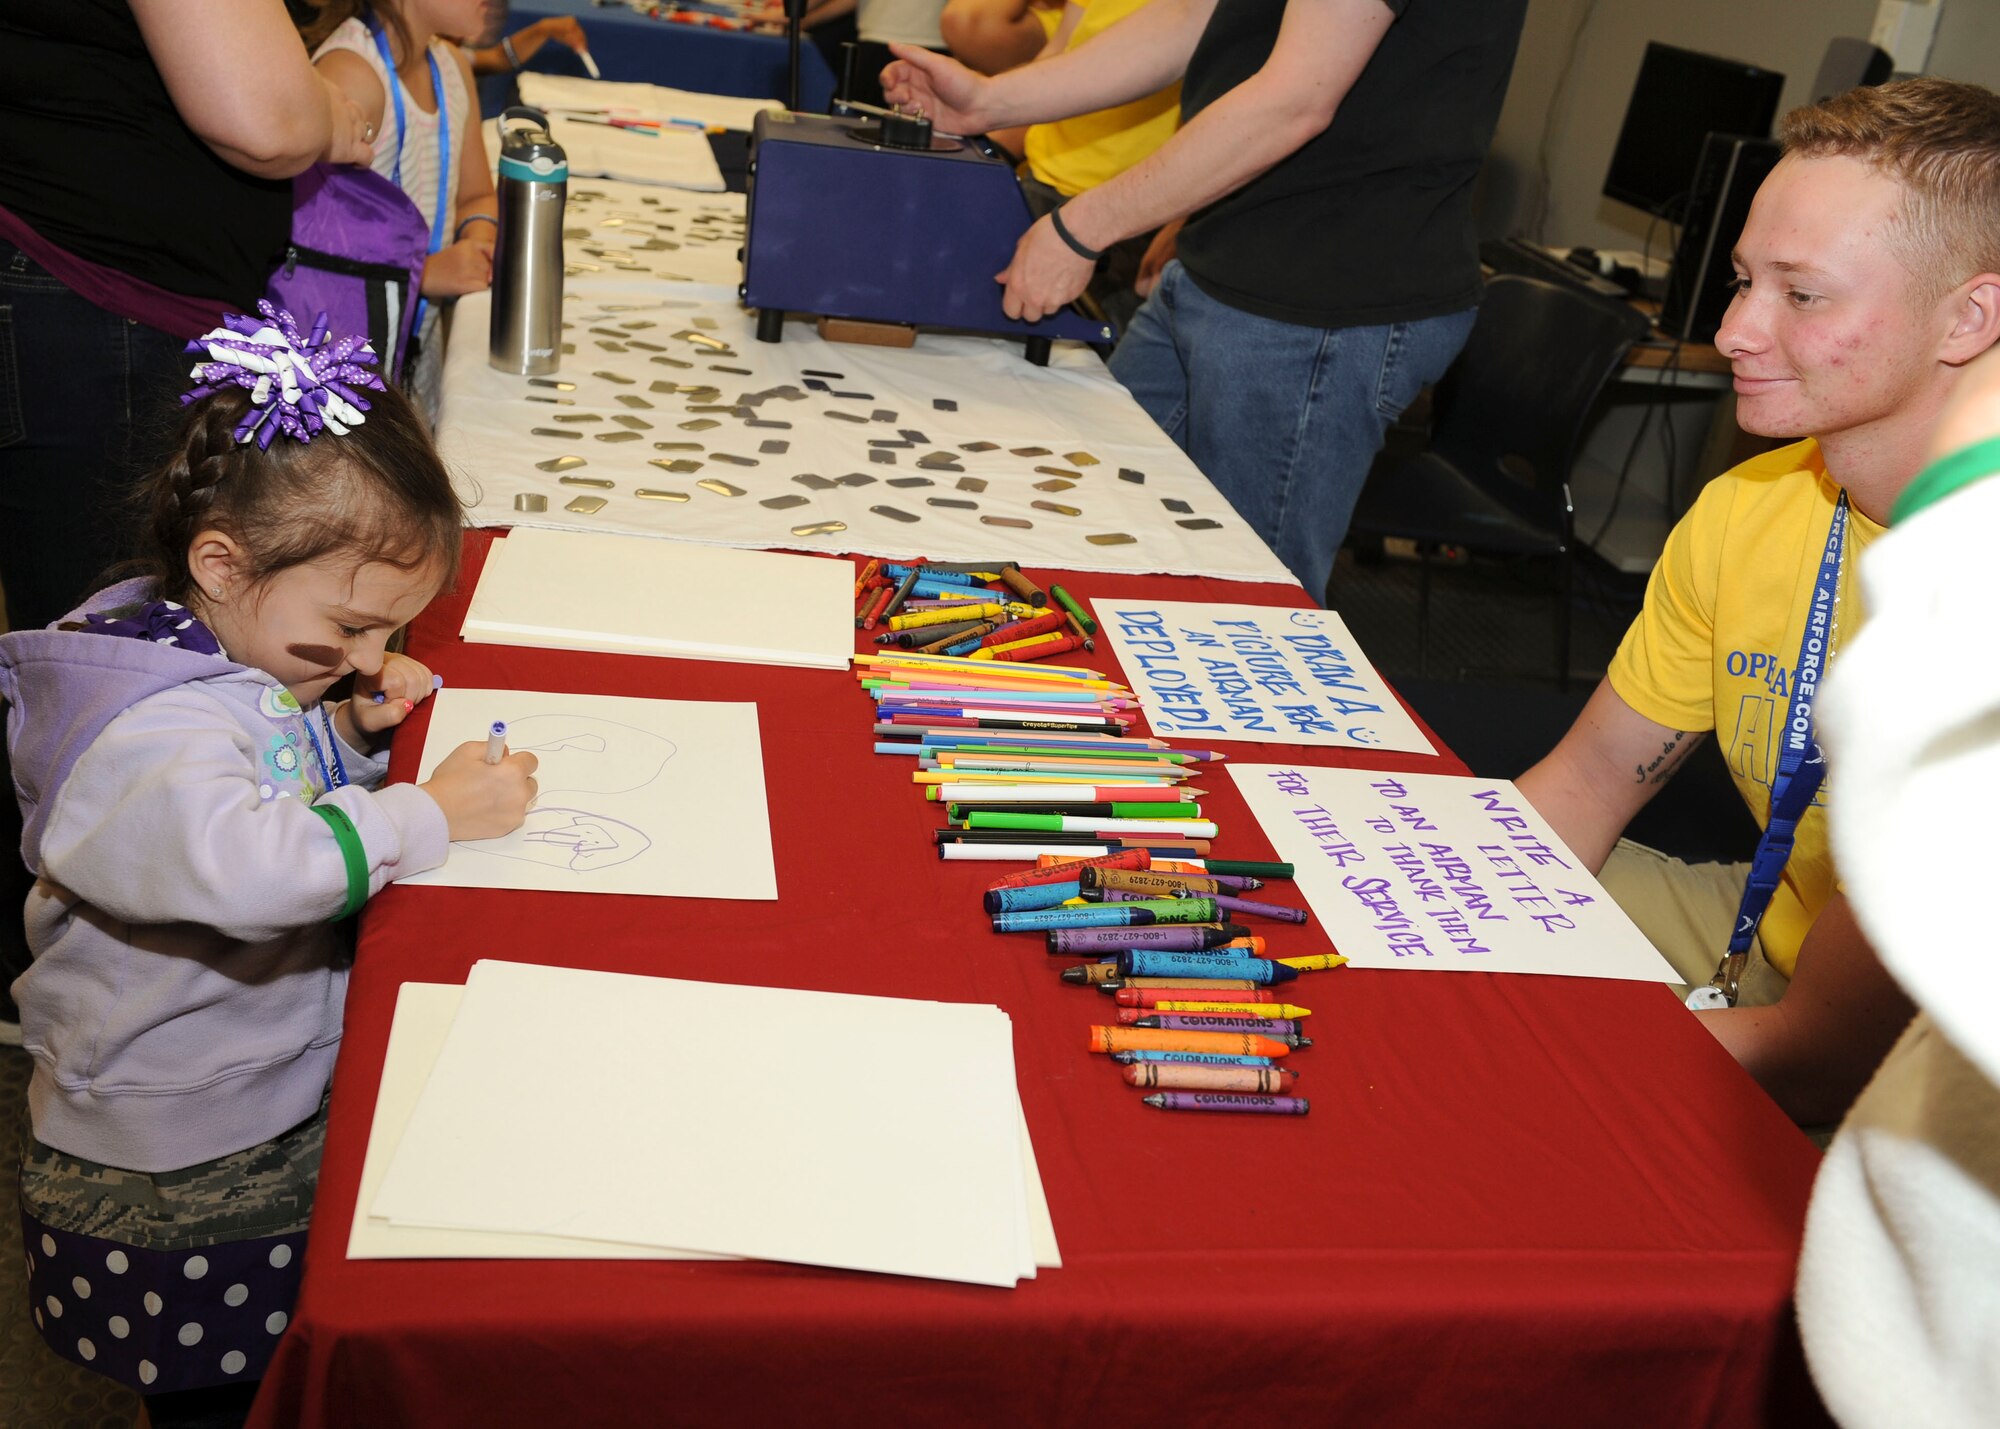 A child colors a picture during Operation Heroes at Minot Air Force Base, N.D., June 3, 2017. During the event, children tasted Meals Ready-to-Eat, tried on gear, saw weapons displays and created custom-made dog tags. The event concluded with a redeployment line and a welcome home celebration. (U.S. Air Force photo/Senior Airman Sahara L. Fales)